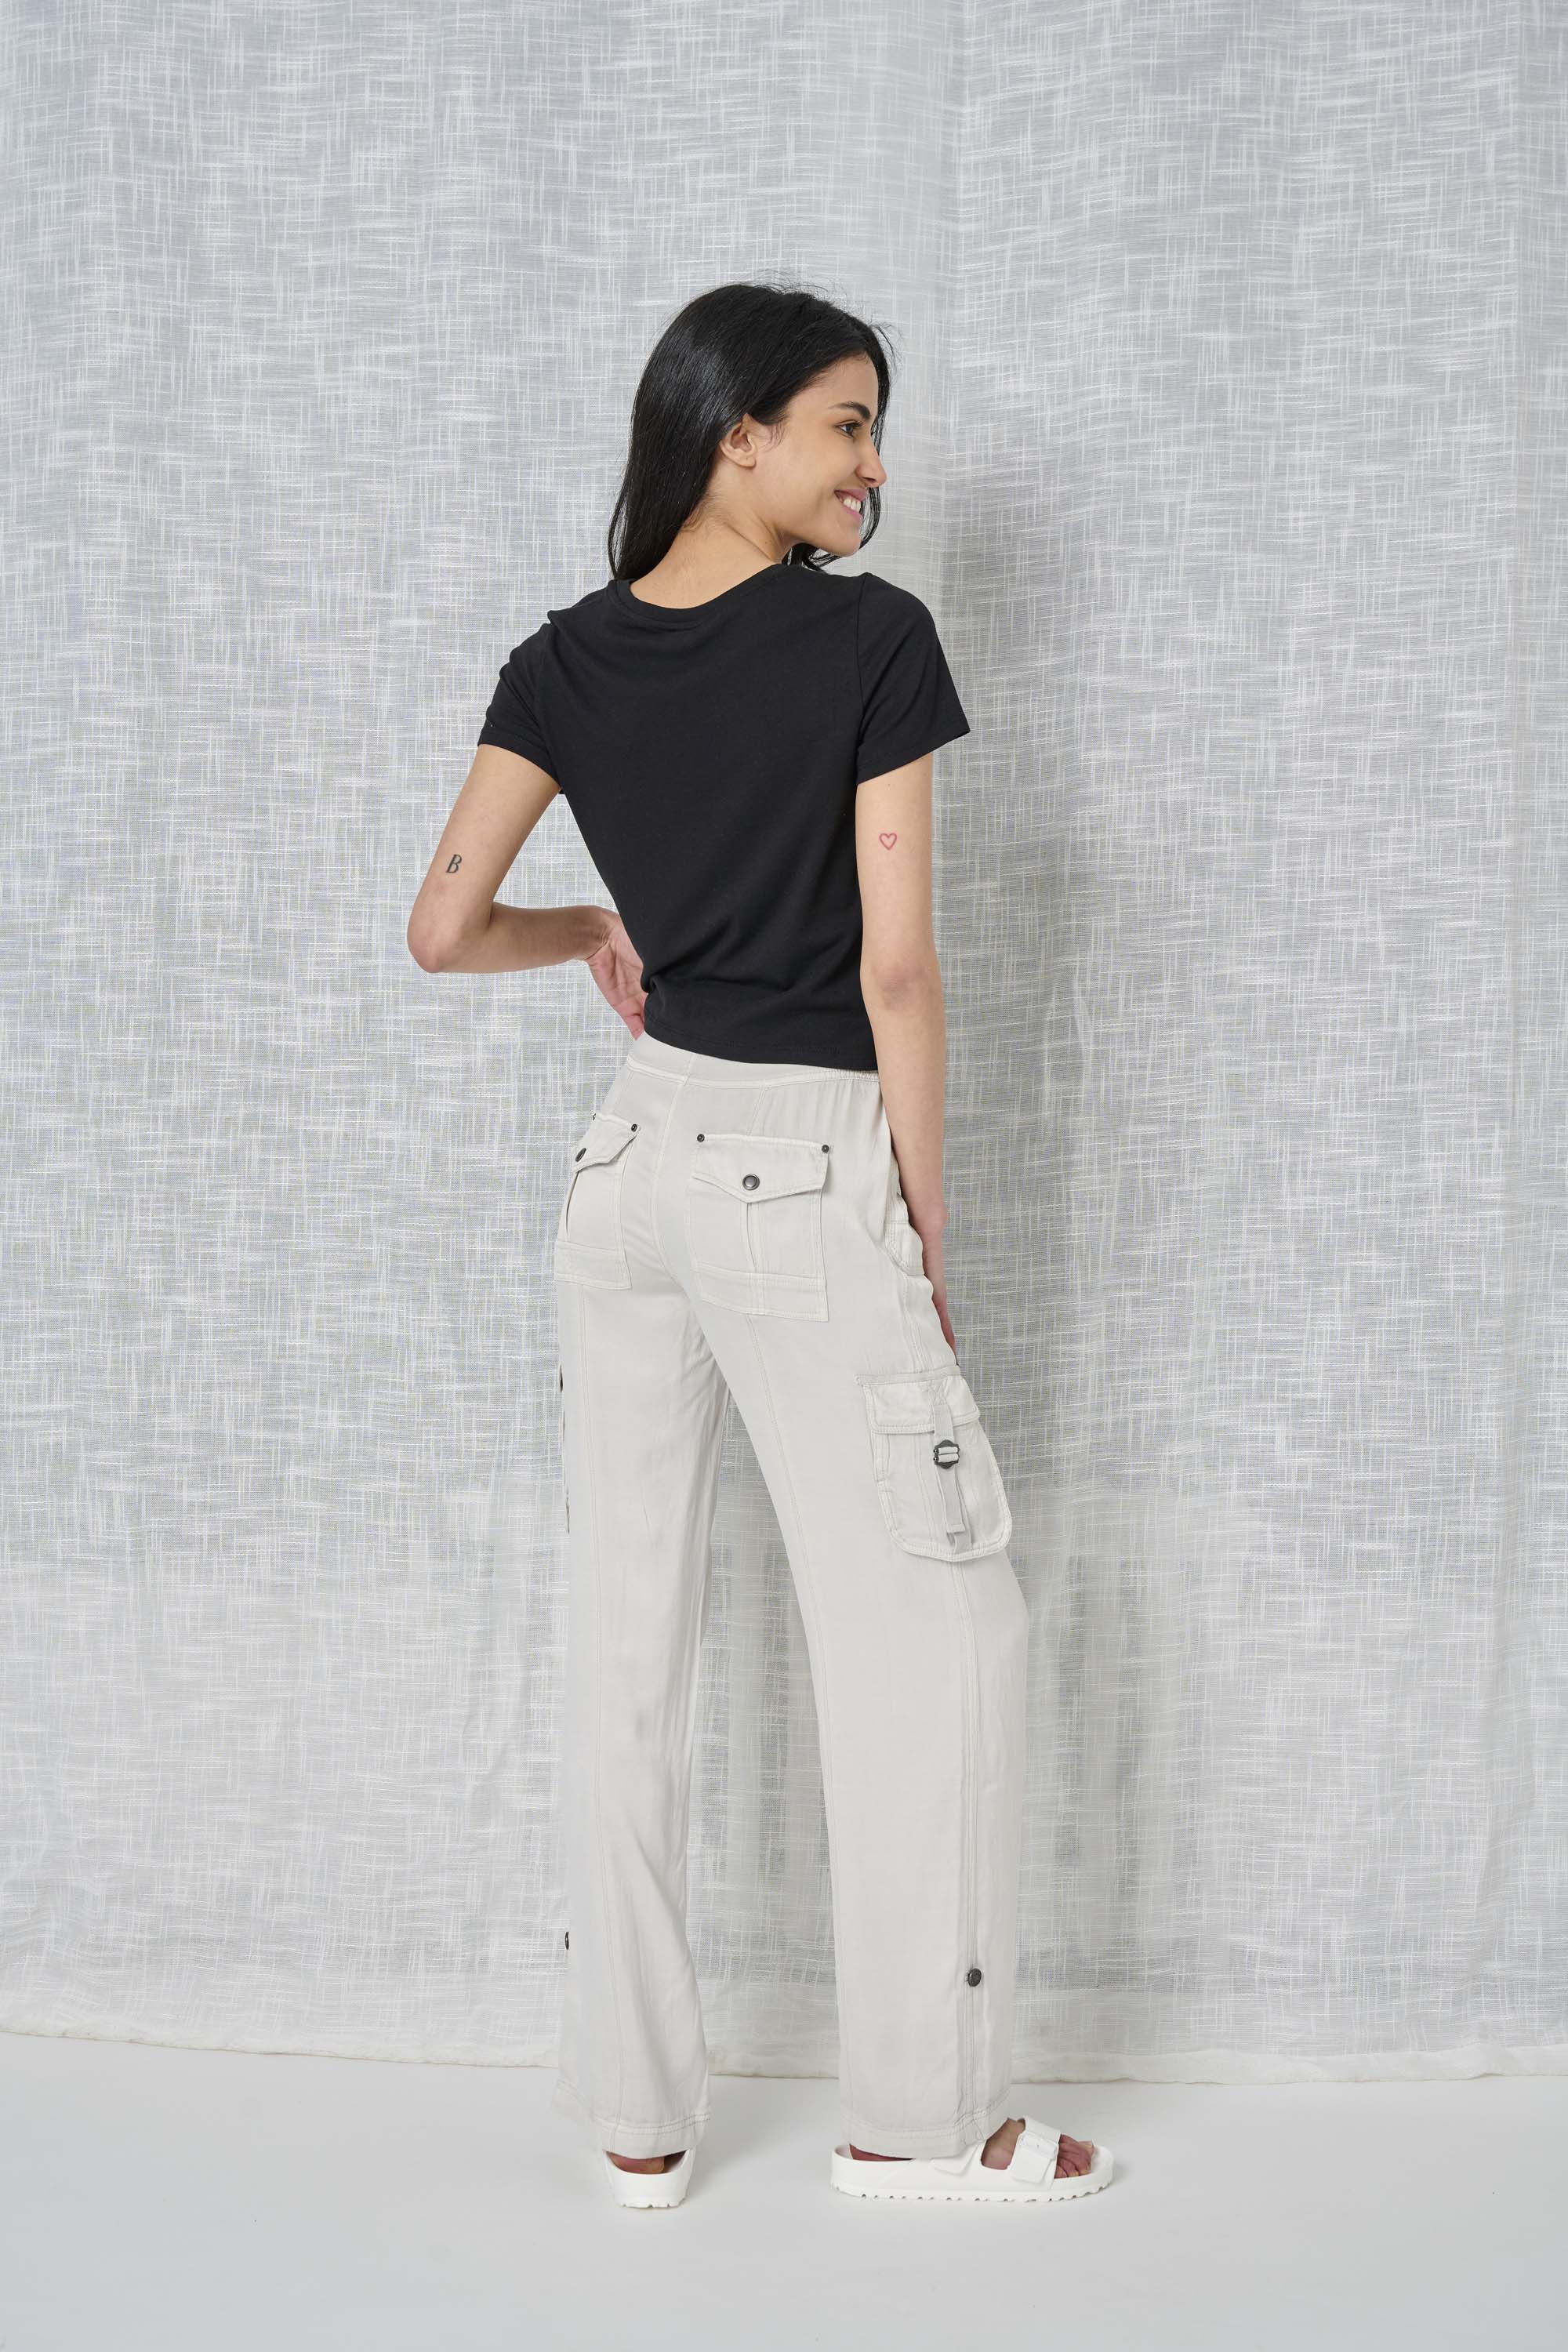 Solid Cupro Pant